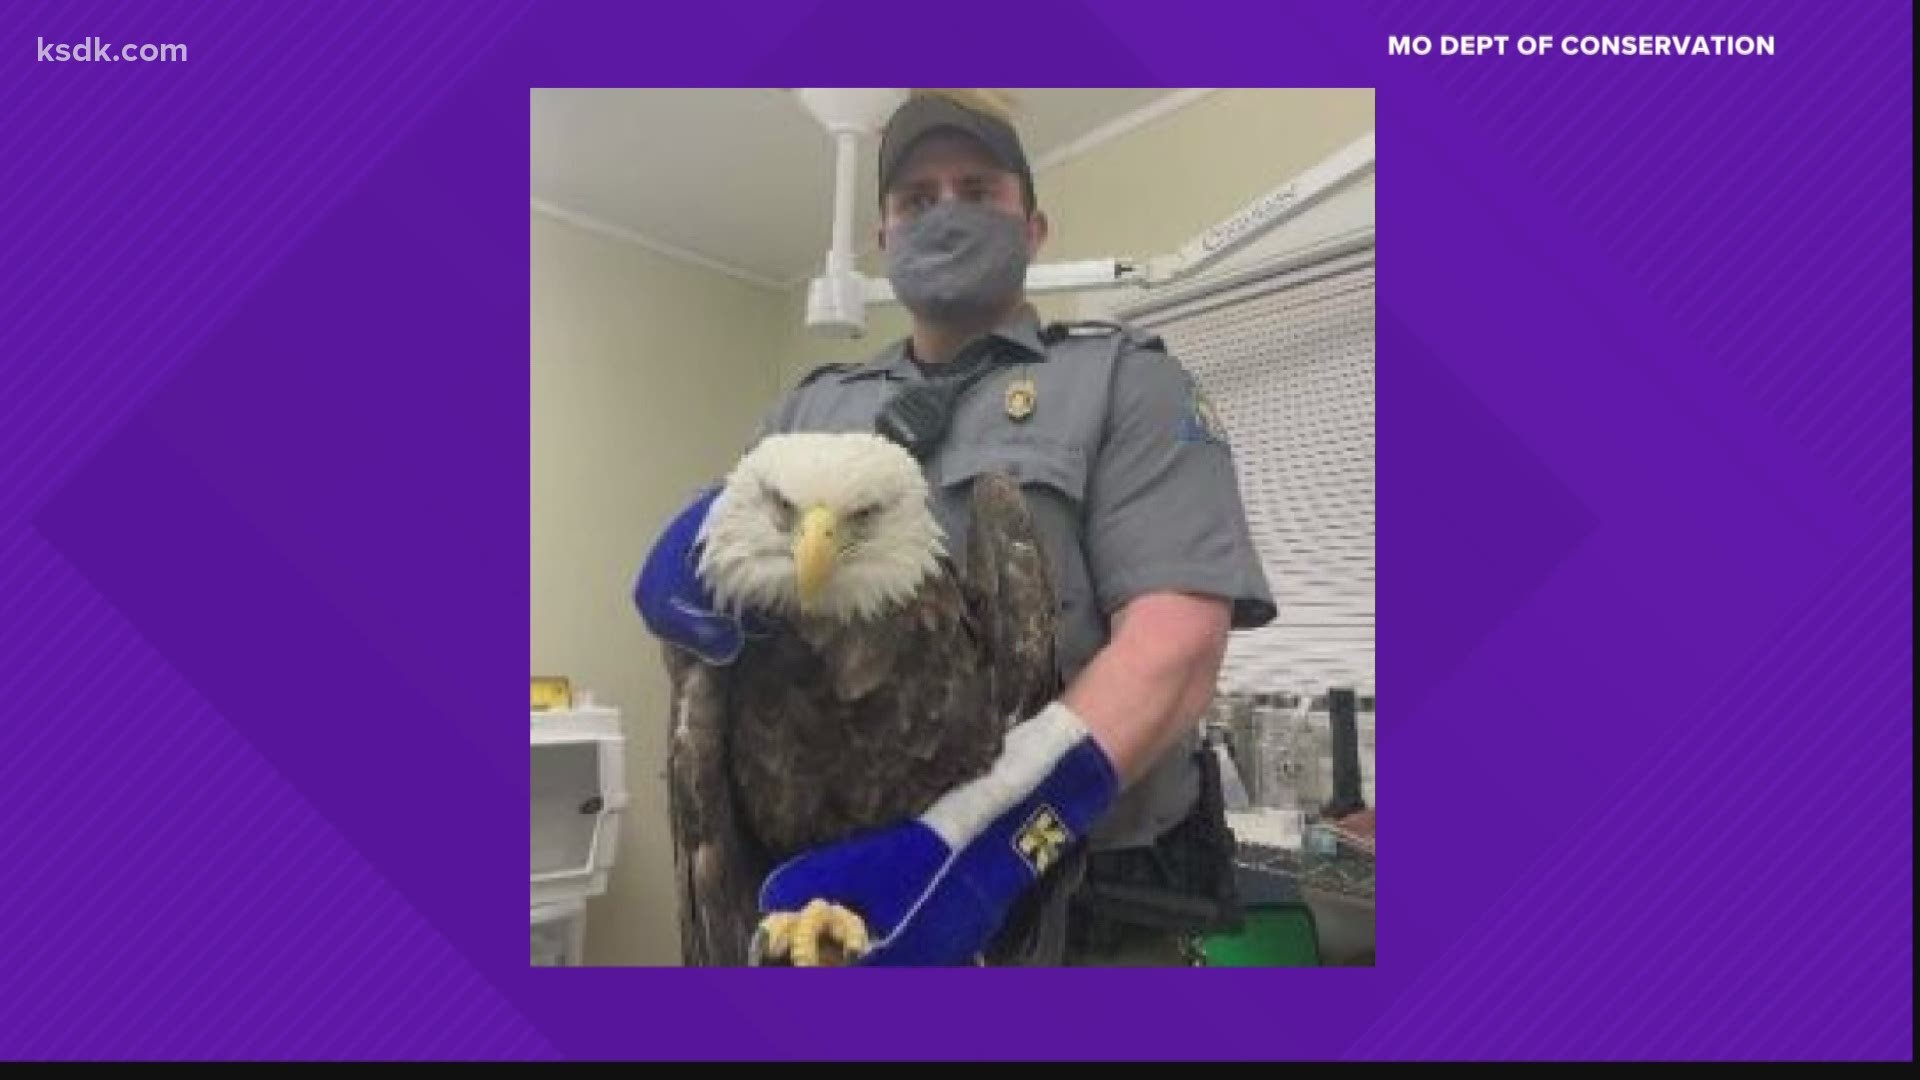 The bald eagle had to be euthanized due to severe tissue and bone damage, MDC confirmed. The shooting happened in southern Washington County earlier this month